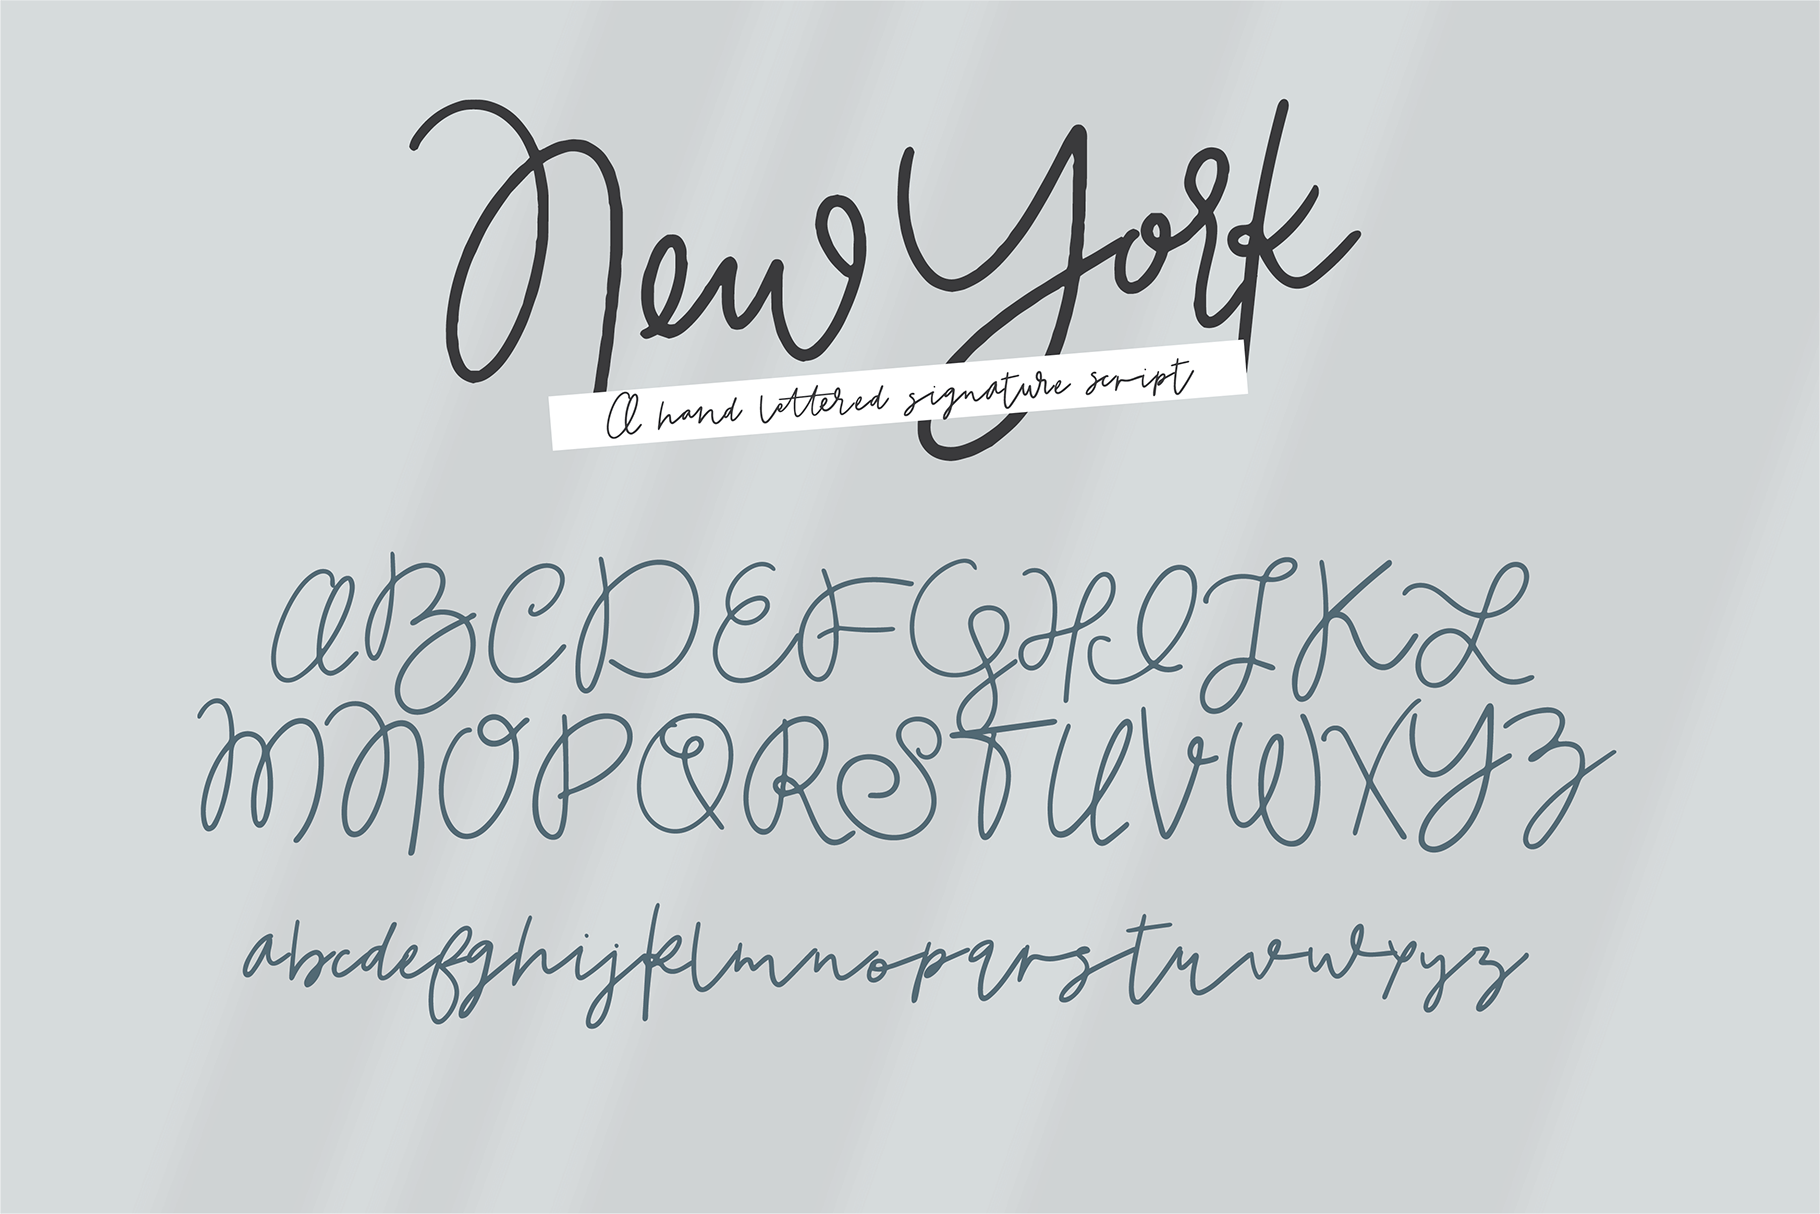 NEW YORK a Hand Lettered Signature Script Font By Blush Font Co